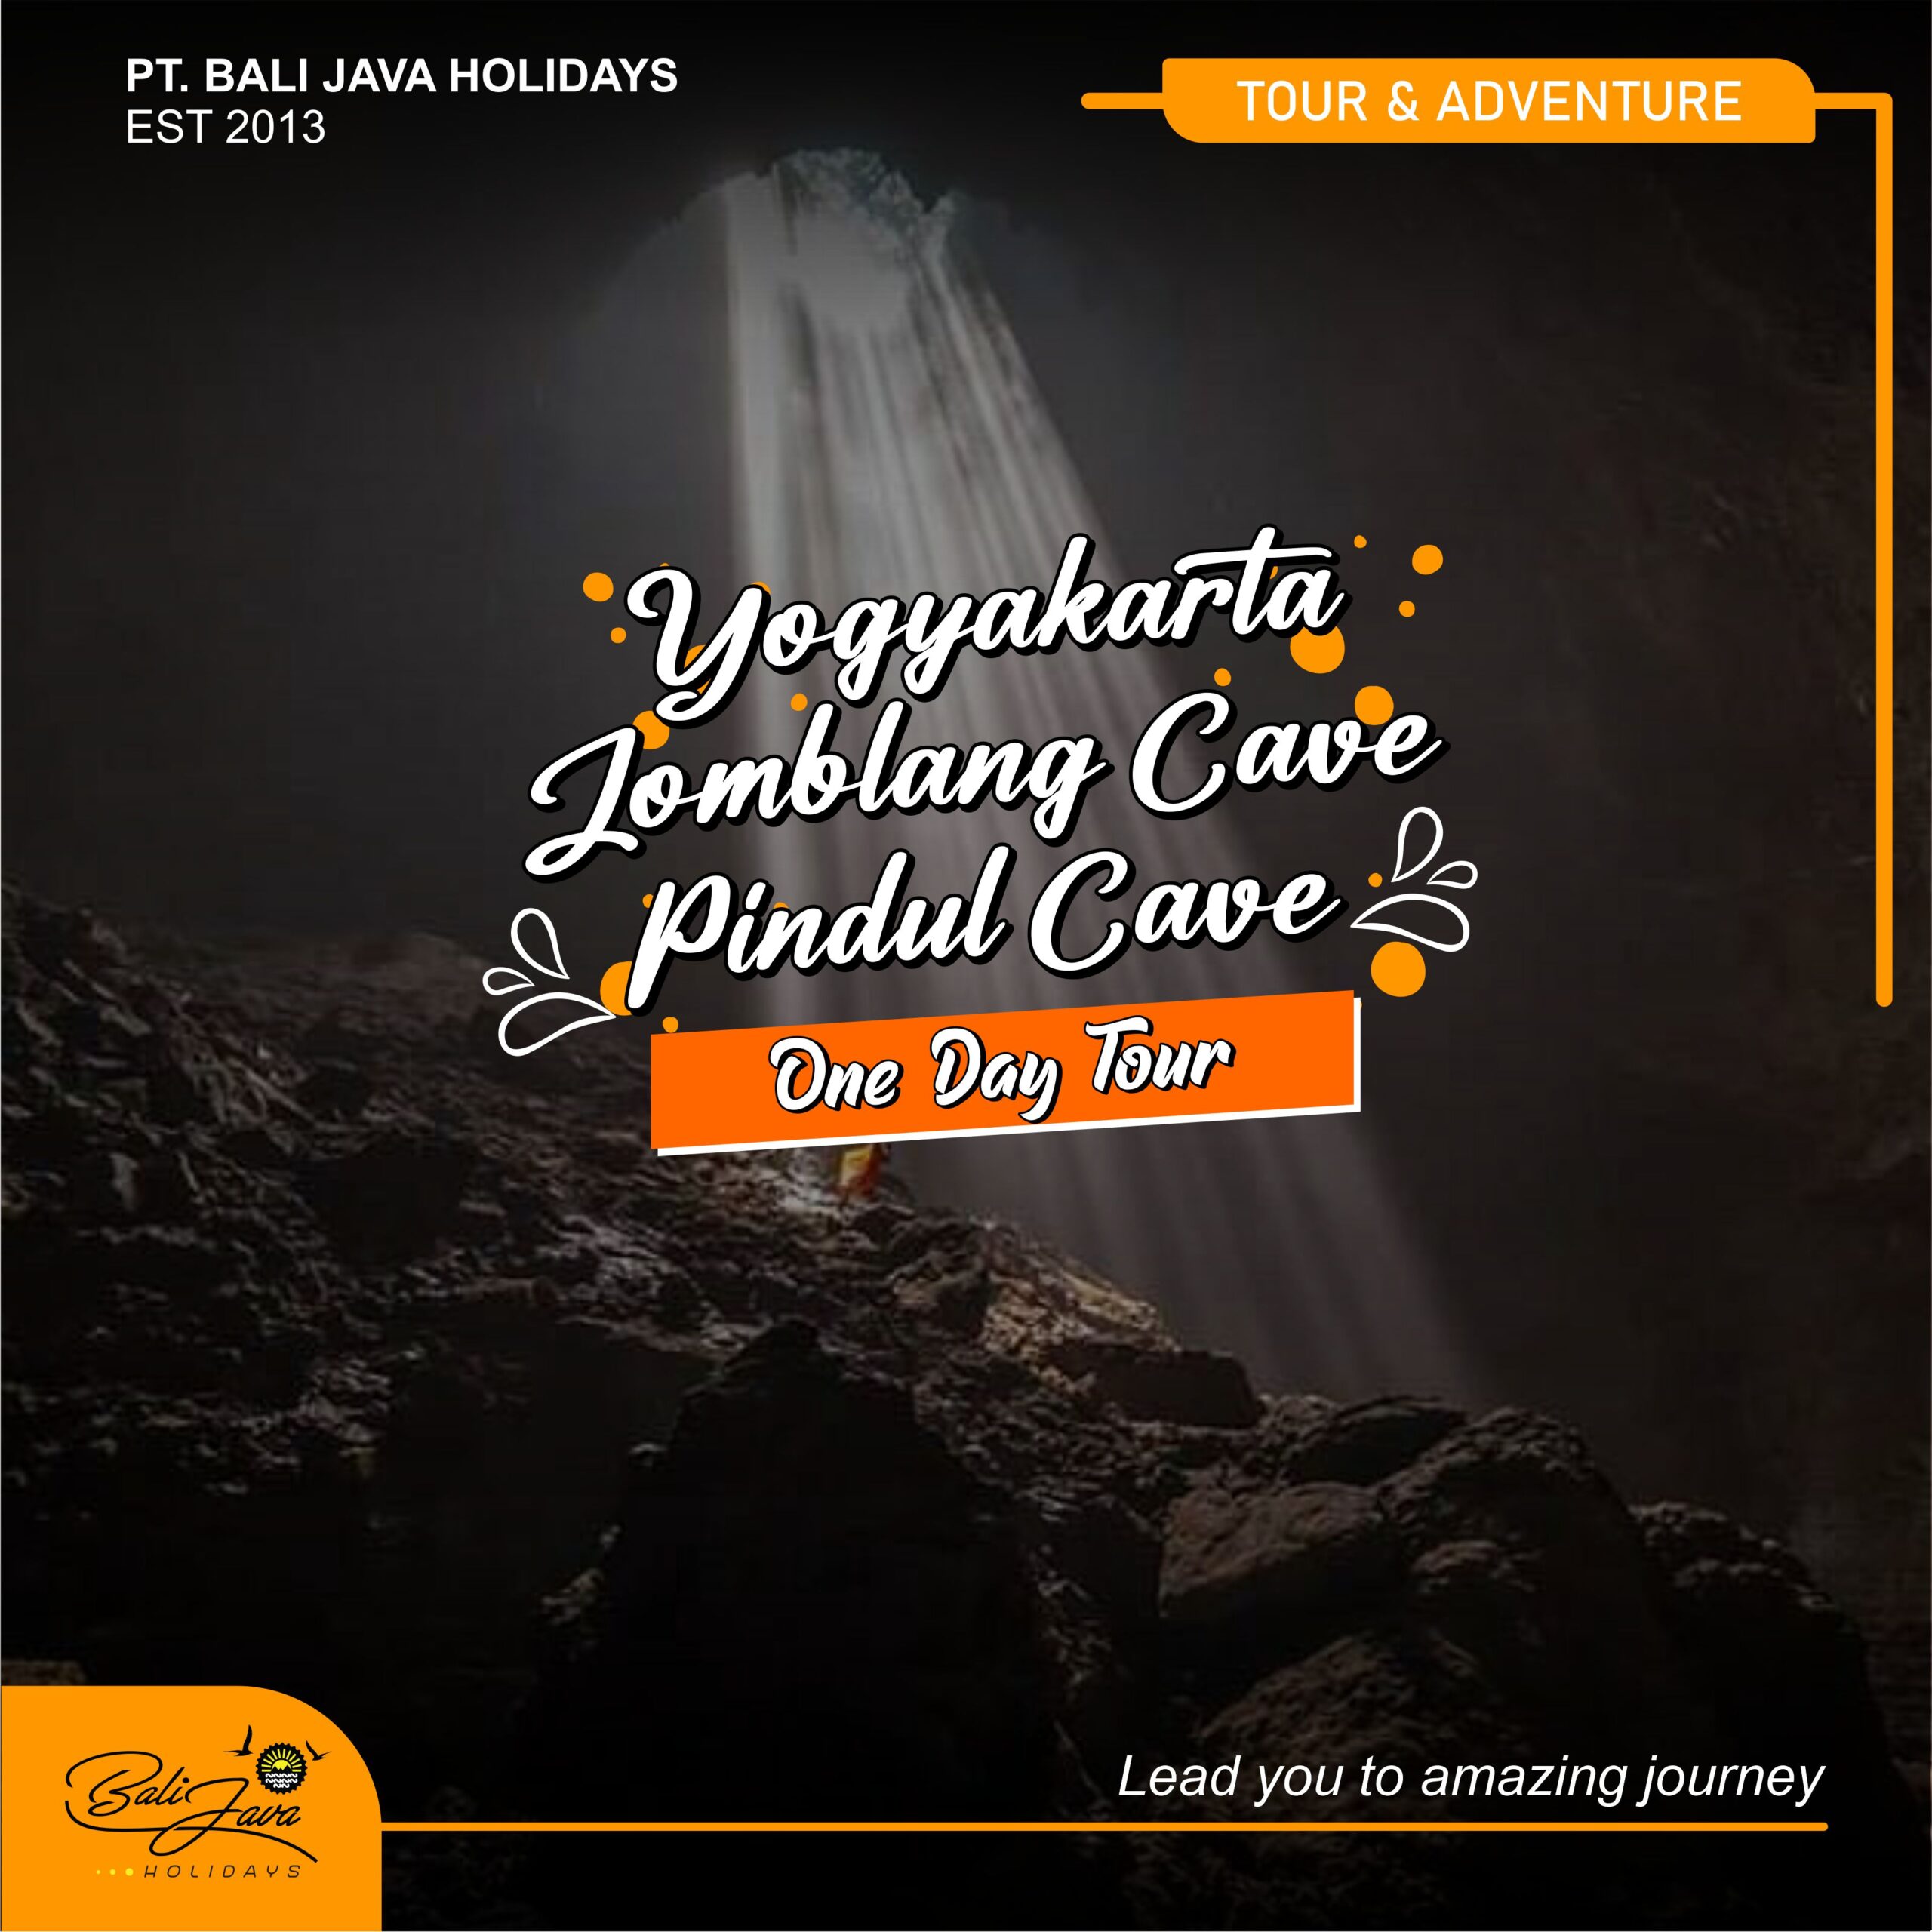 JOMBLANG CAVE – PINDUL CAVE – ONE DAY TOUR